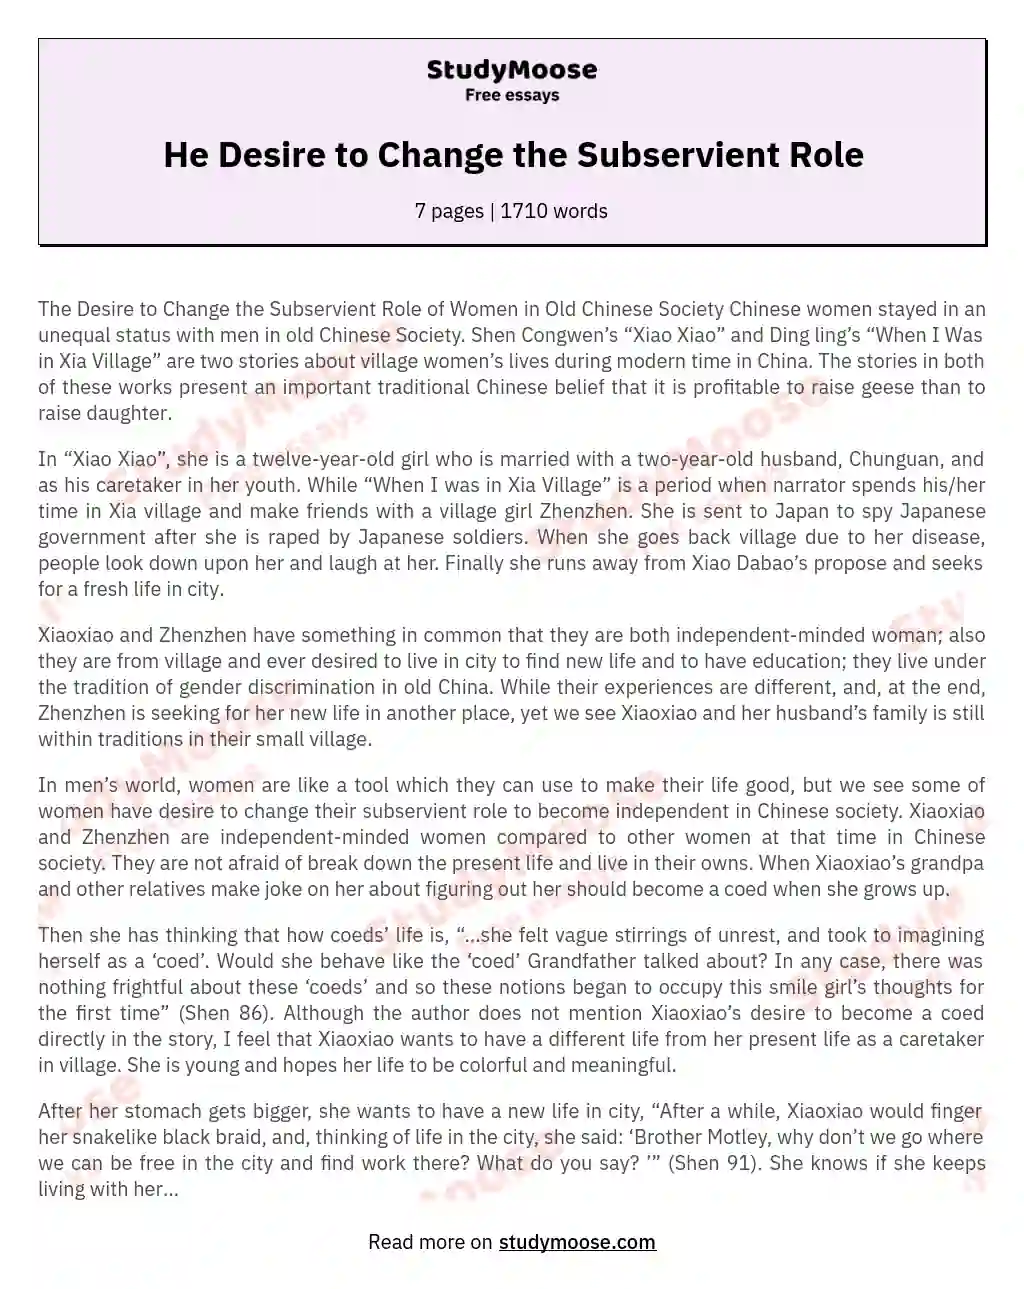 He Desire to Change the Subservient Role essay